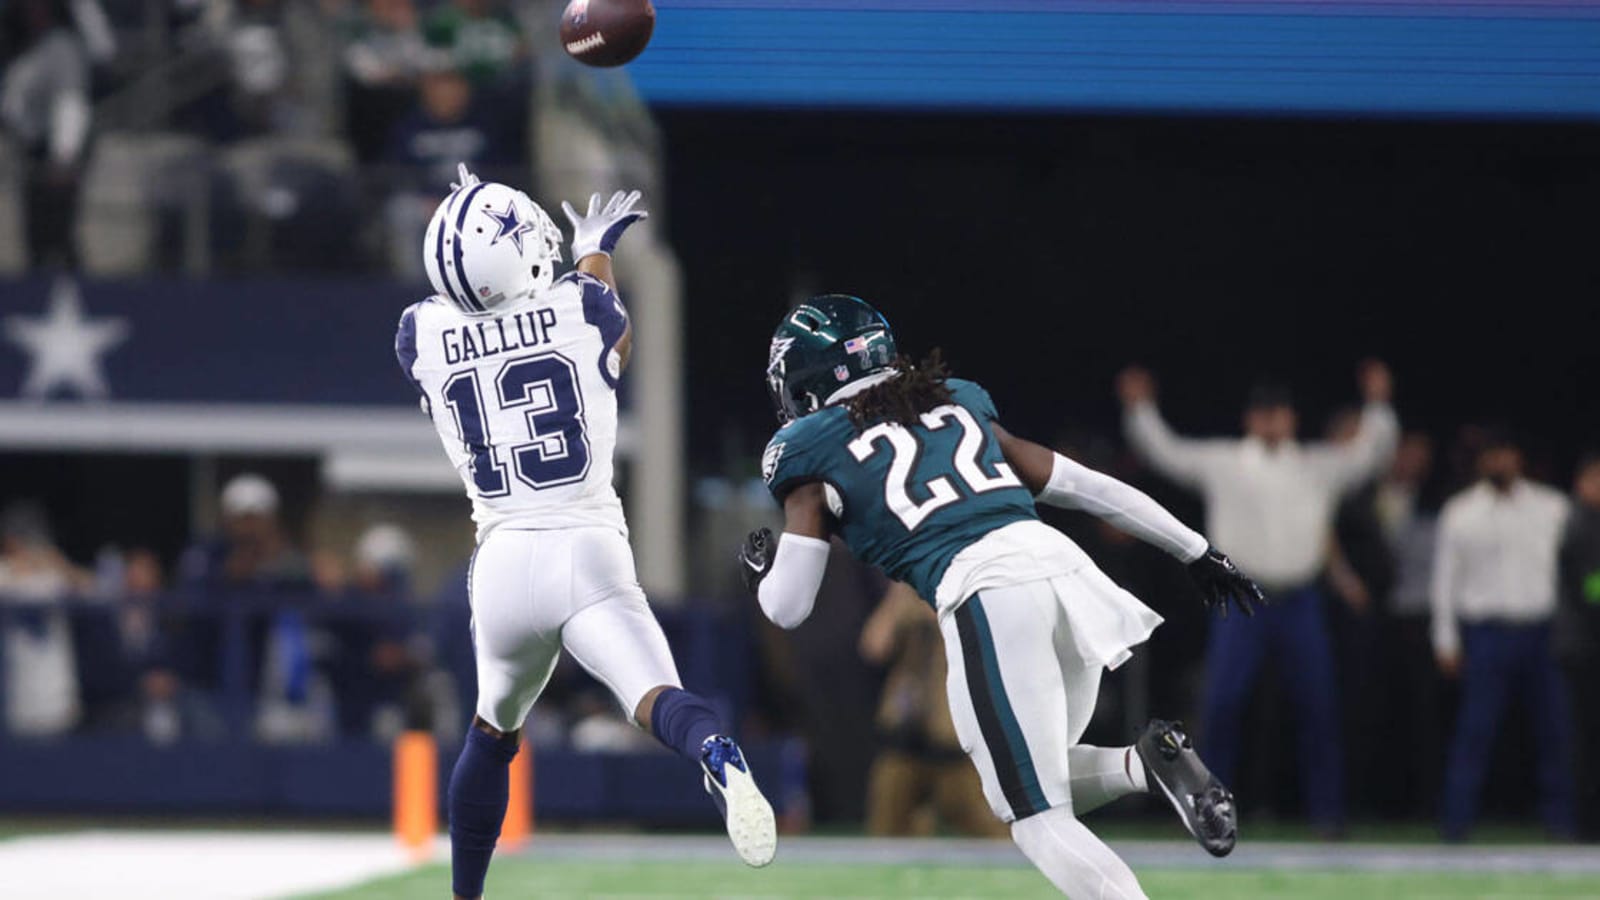 Eagles CB Kelee Ringo records first career NFL interception to seal 33-25 win over Giants